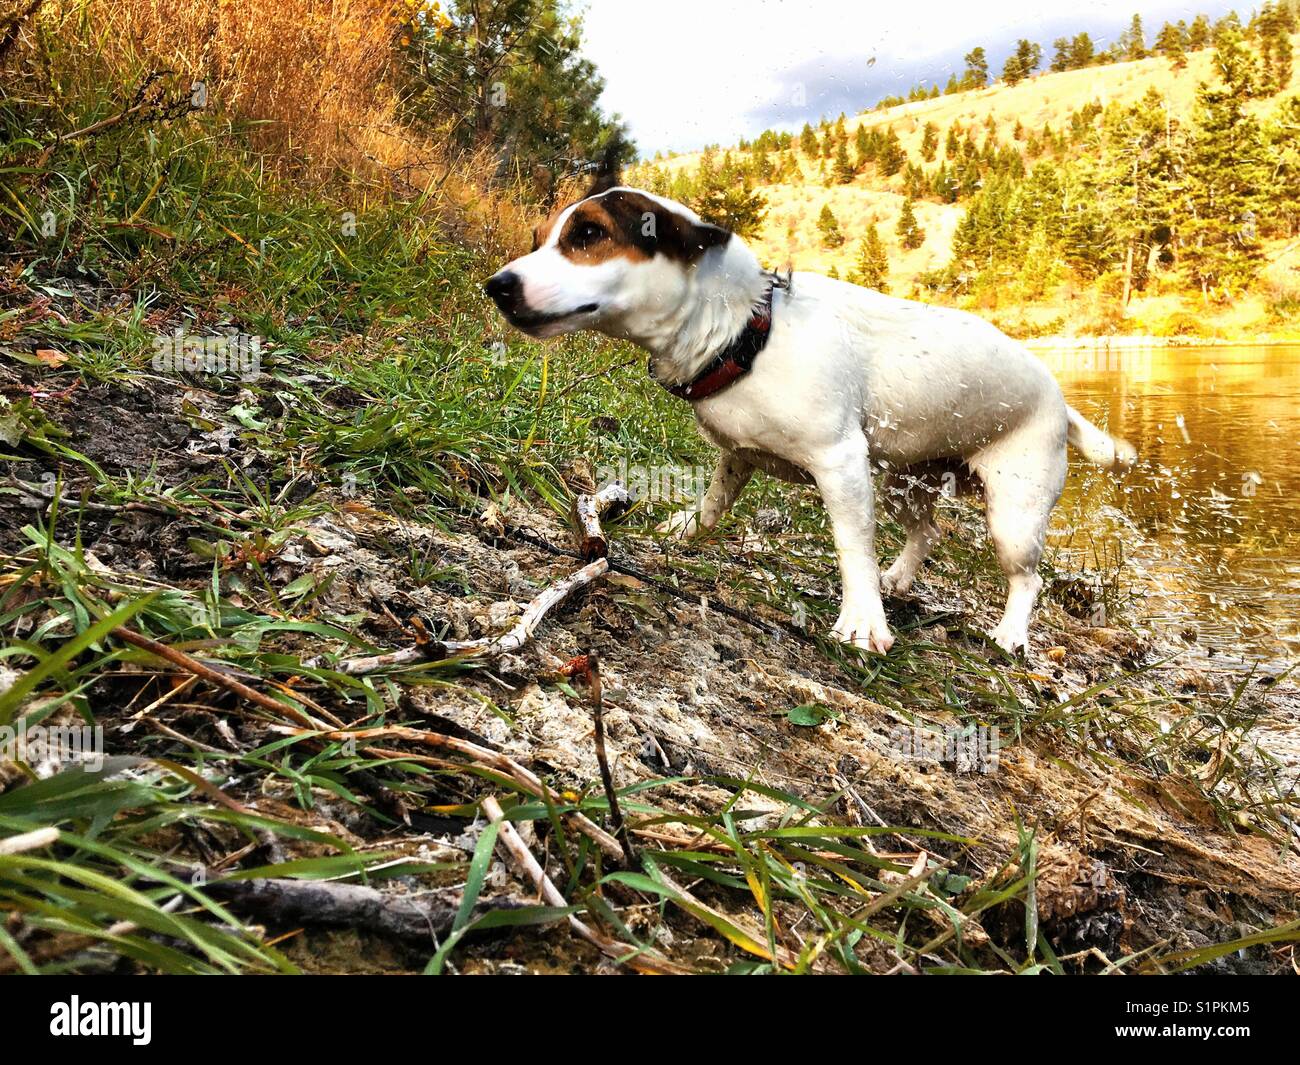 Jack Russell Terrier dog shaking water off after a swim in the lake on a sunny autumn day. Stock Photo